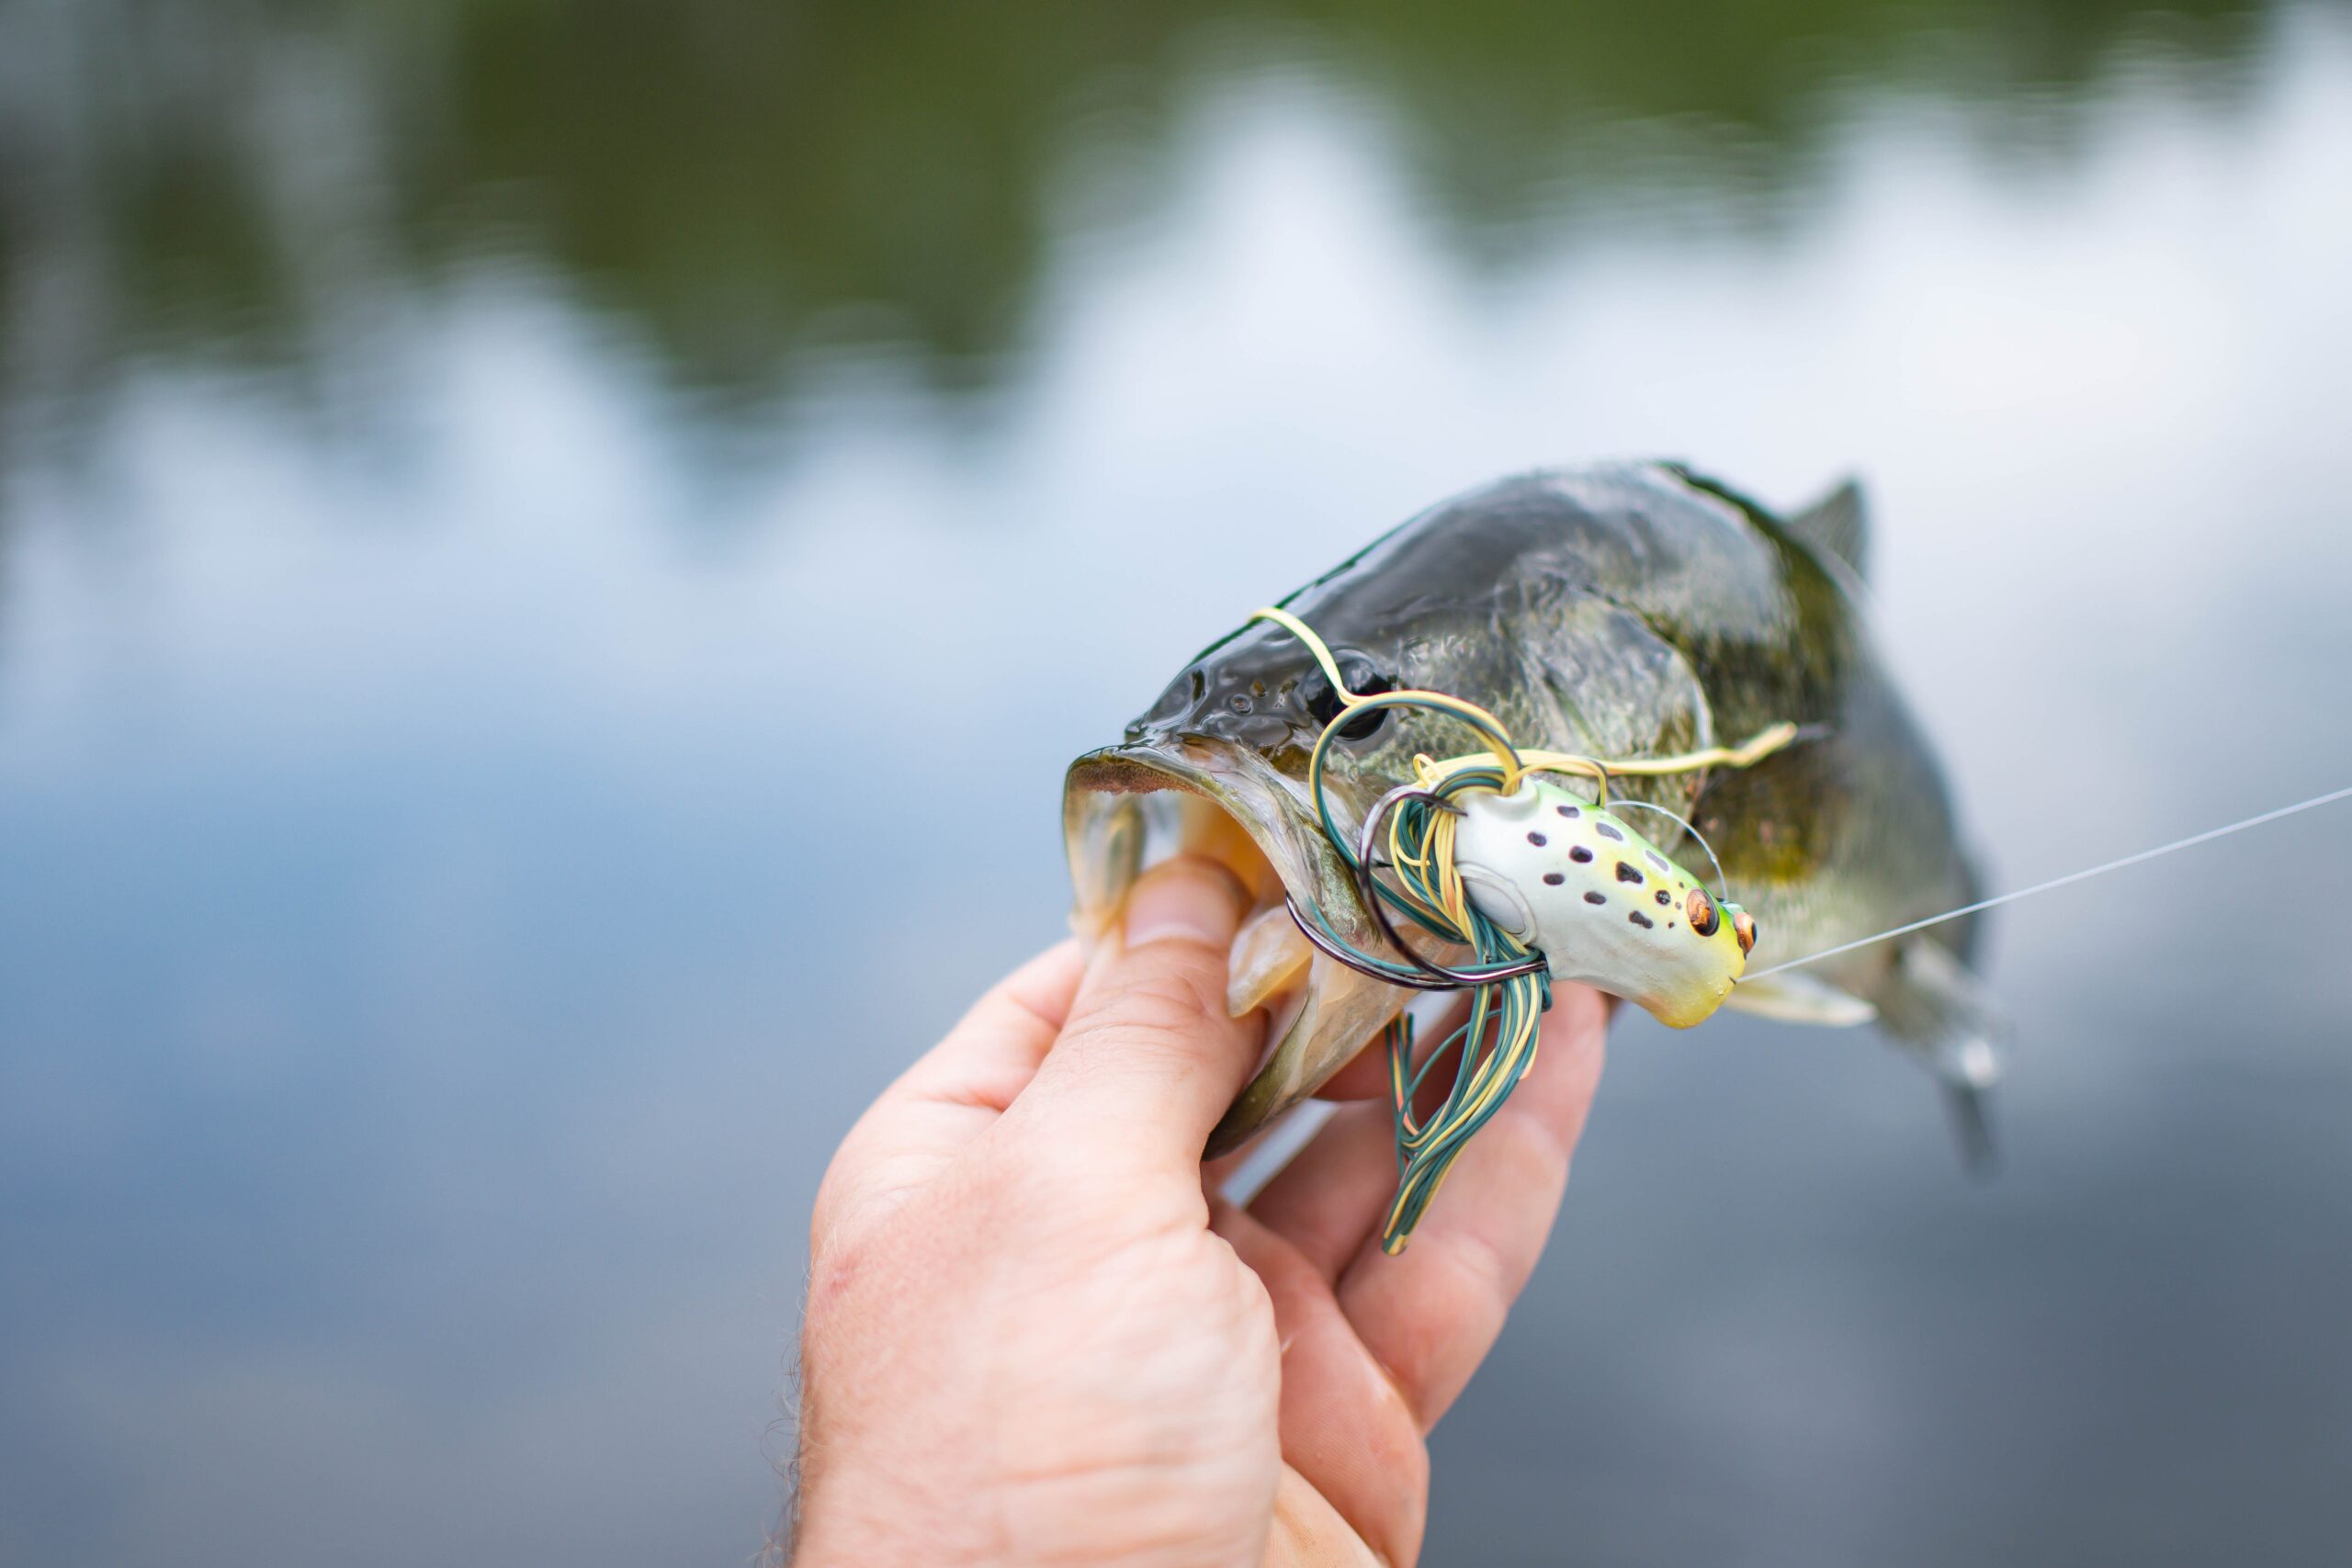 What Bass Fishermen Should Know About New Lures